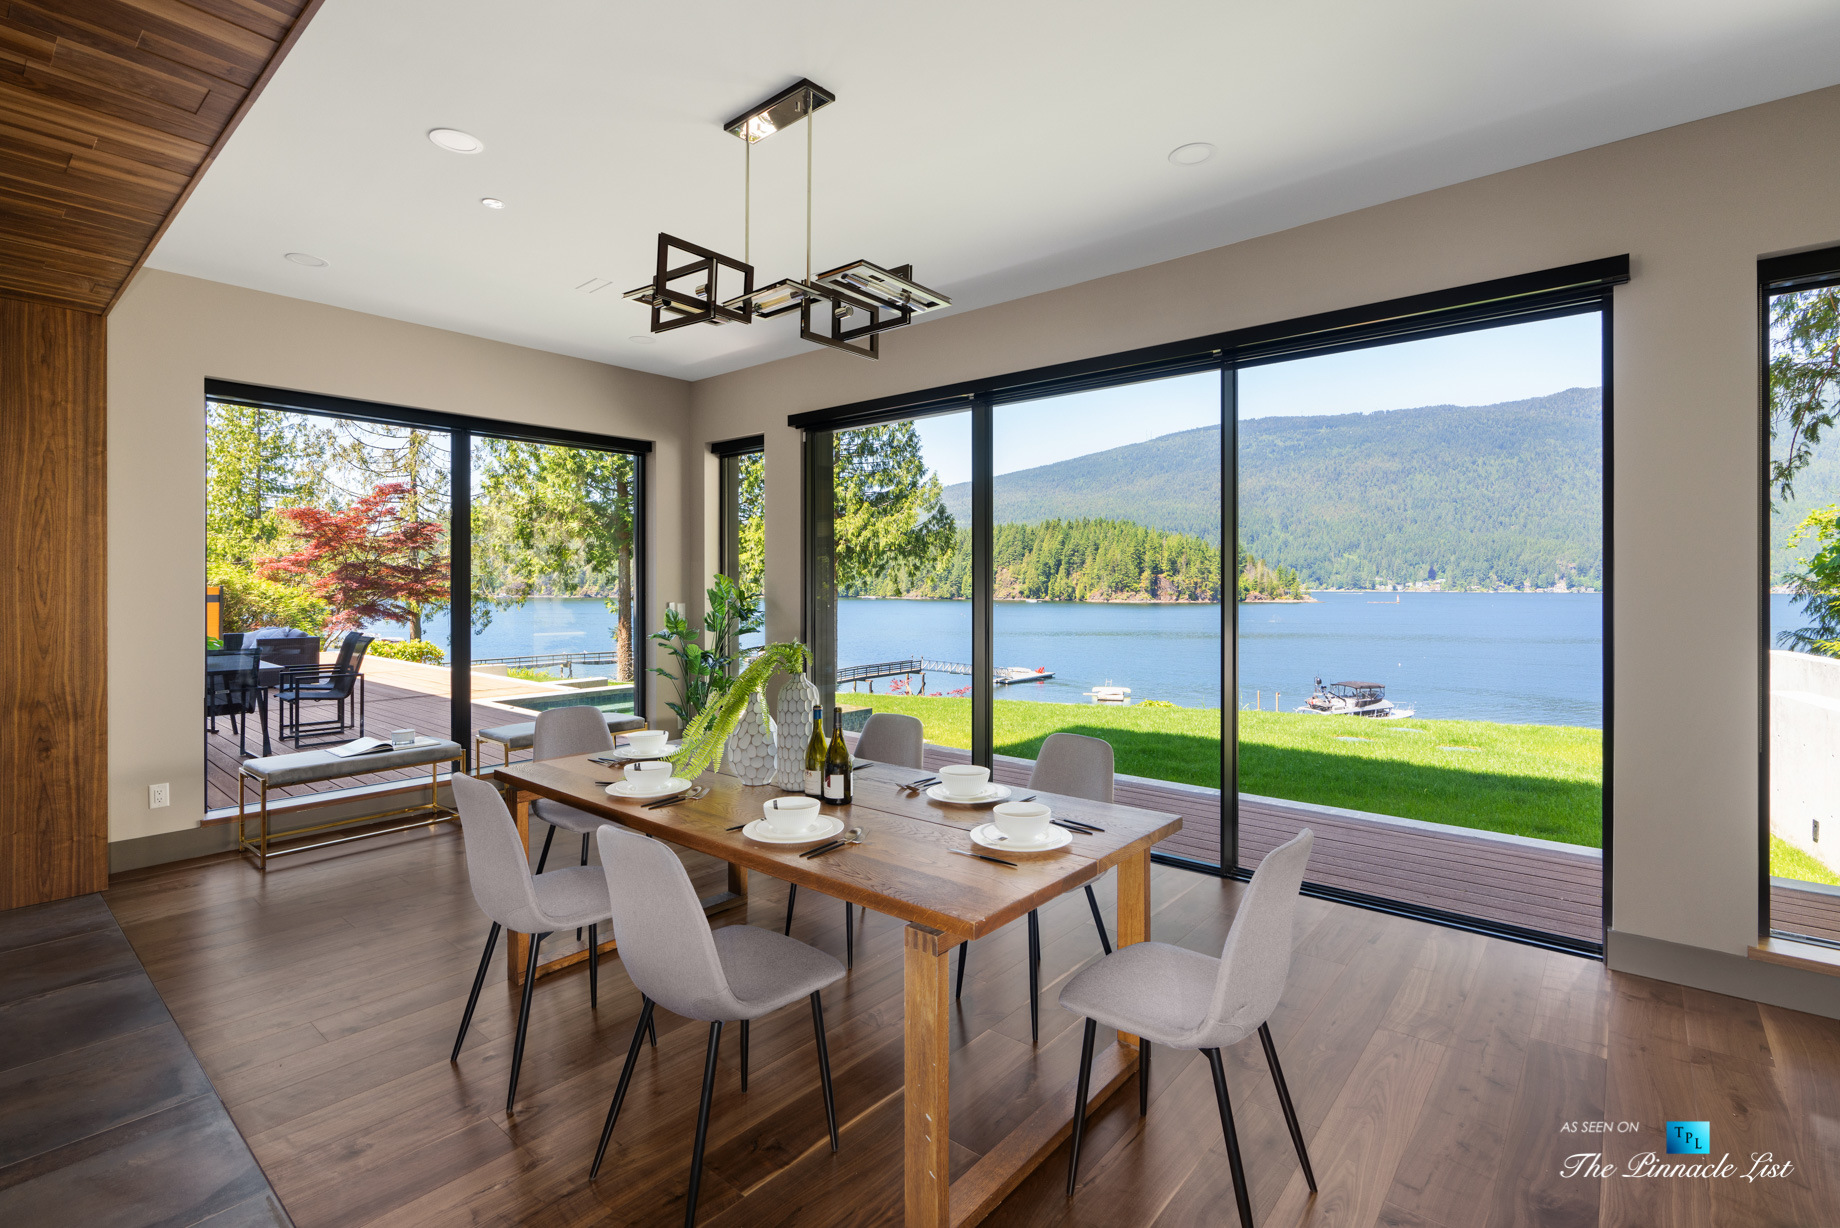 3350 Watson Rd, Belcarra, BC, Canada - Vancouver Luxury Real Estate - Oceanview Dining Room and Deck